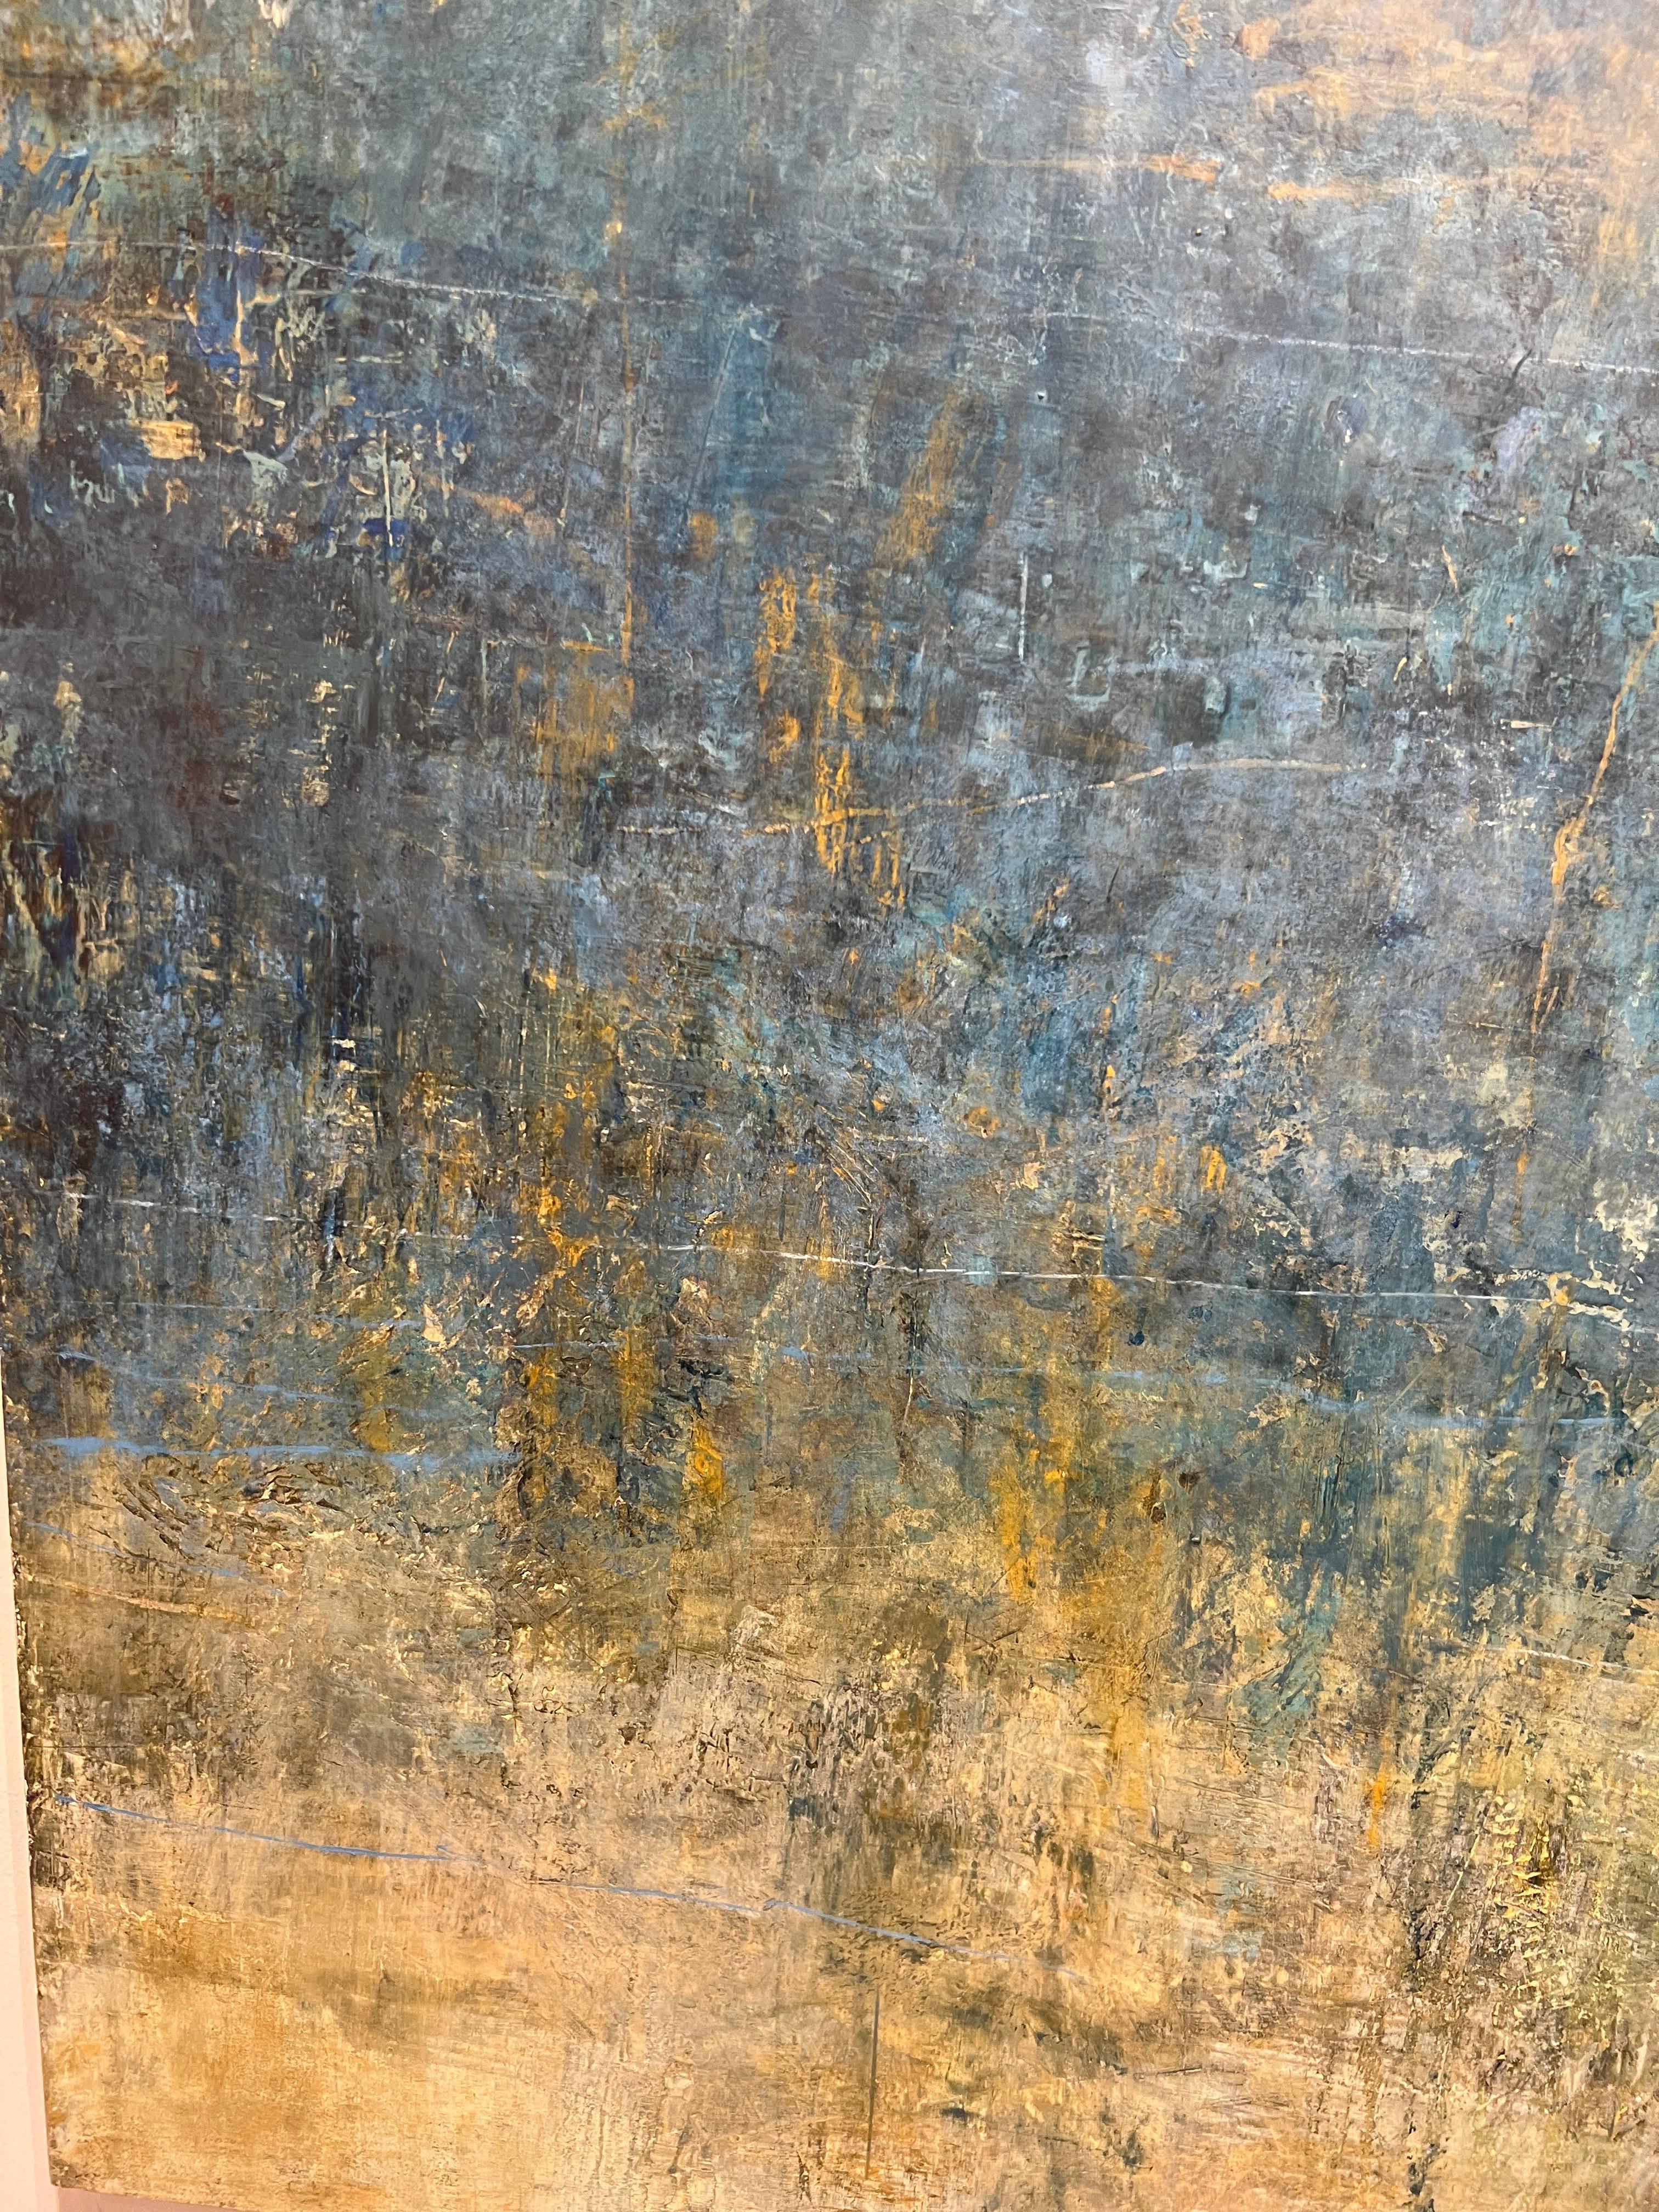 Crowell's abstract paintings are in the challenging media of oil paint and cold wax. 